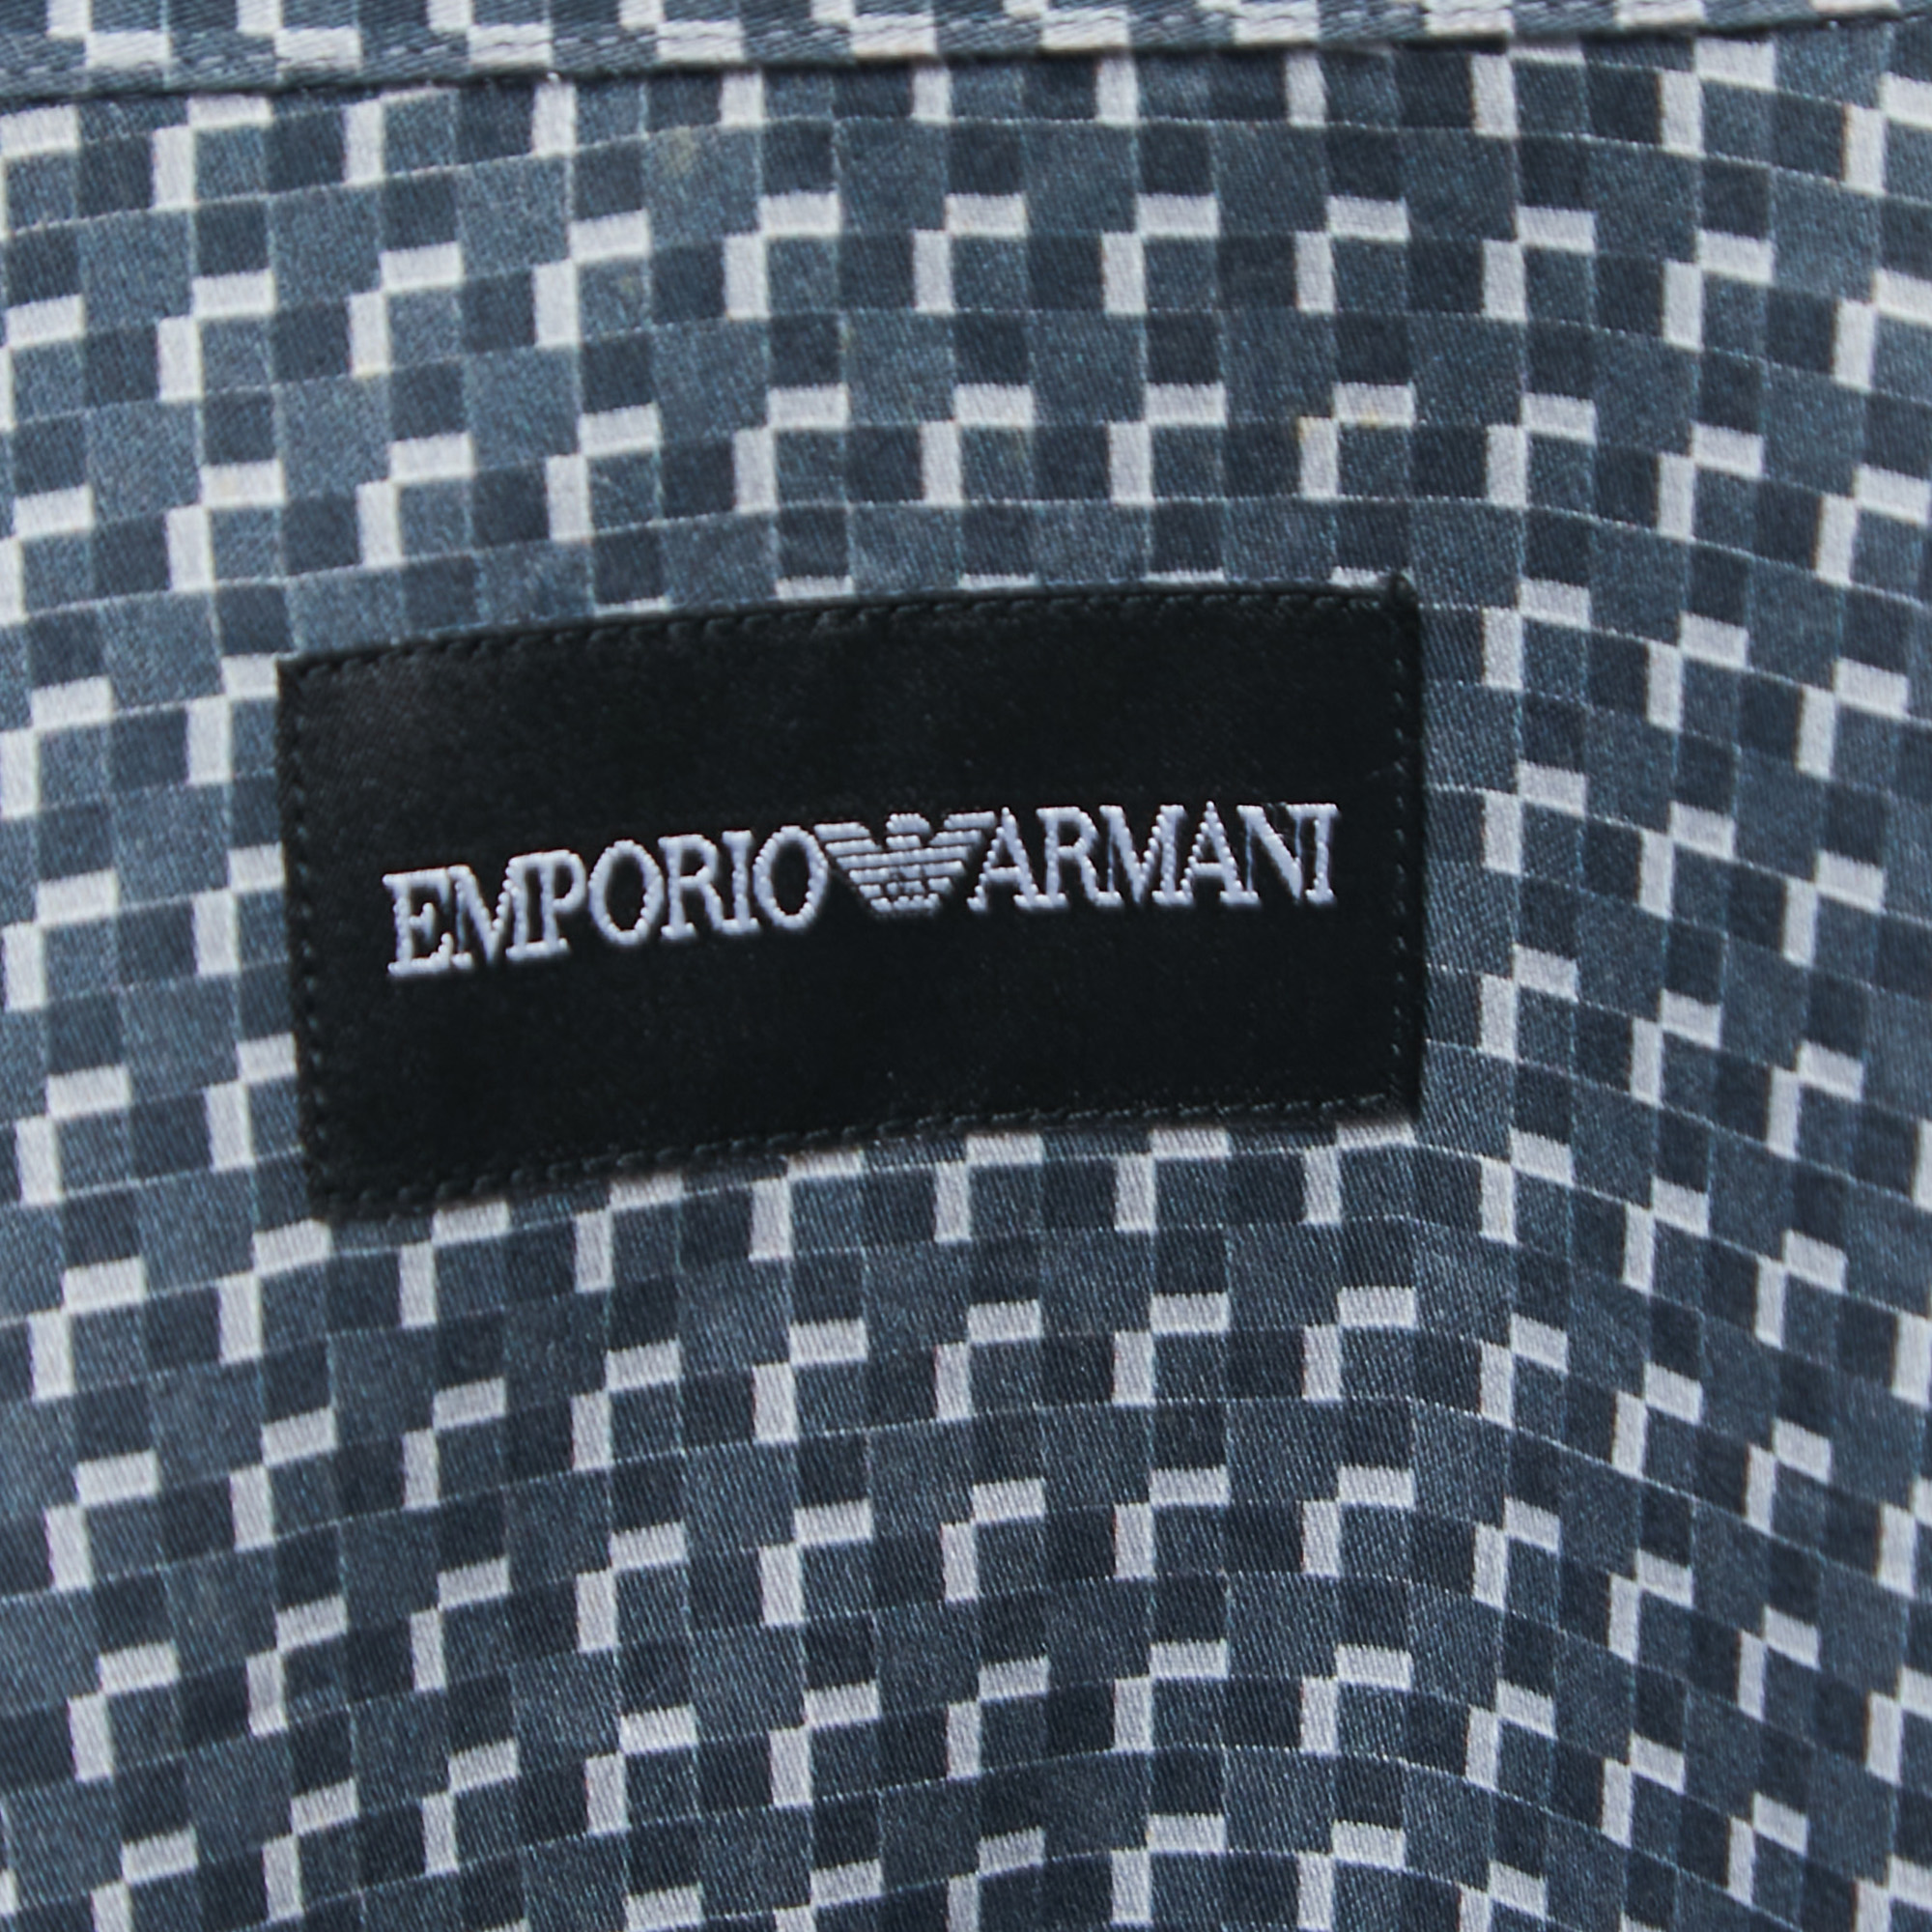 Emporio Armani Grey Patterned Cotton And Wool Knit Full Sleeve Shirt S